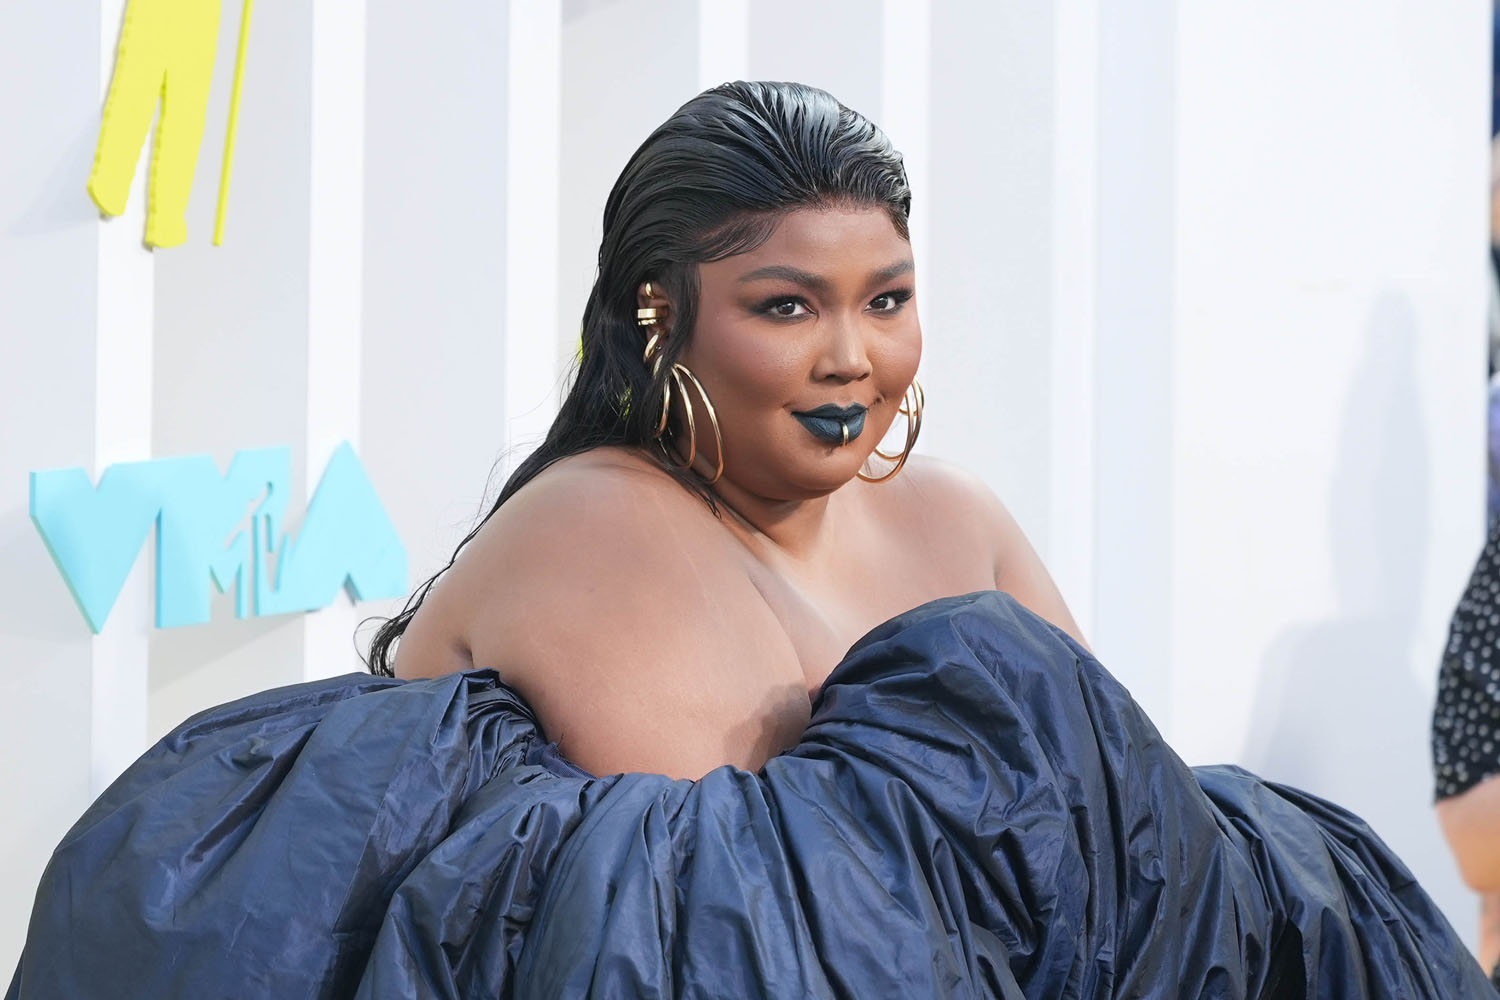 Lizzo's response to allegations against her suggests she thinks they ...